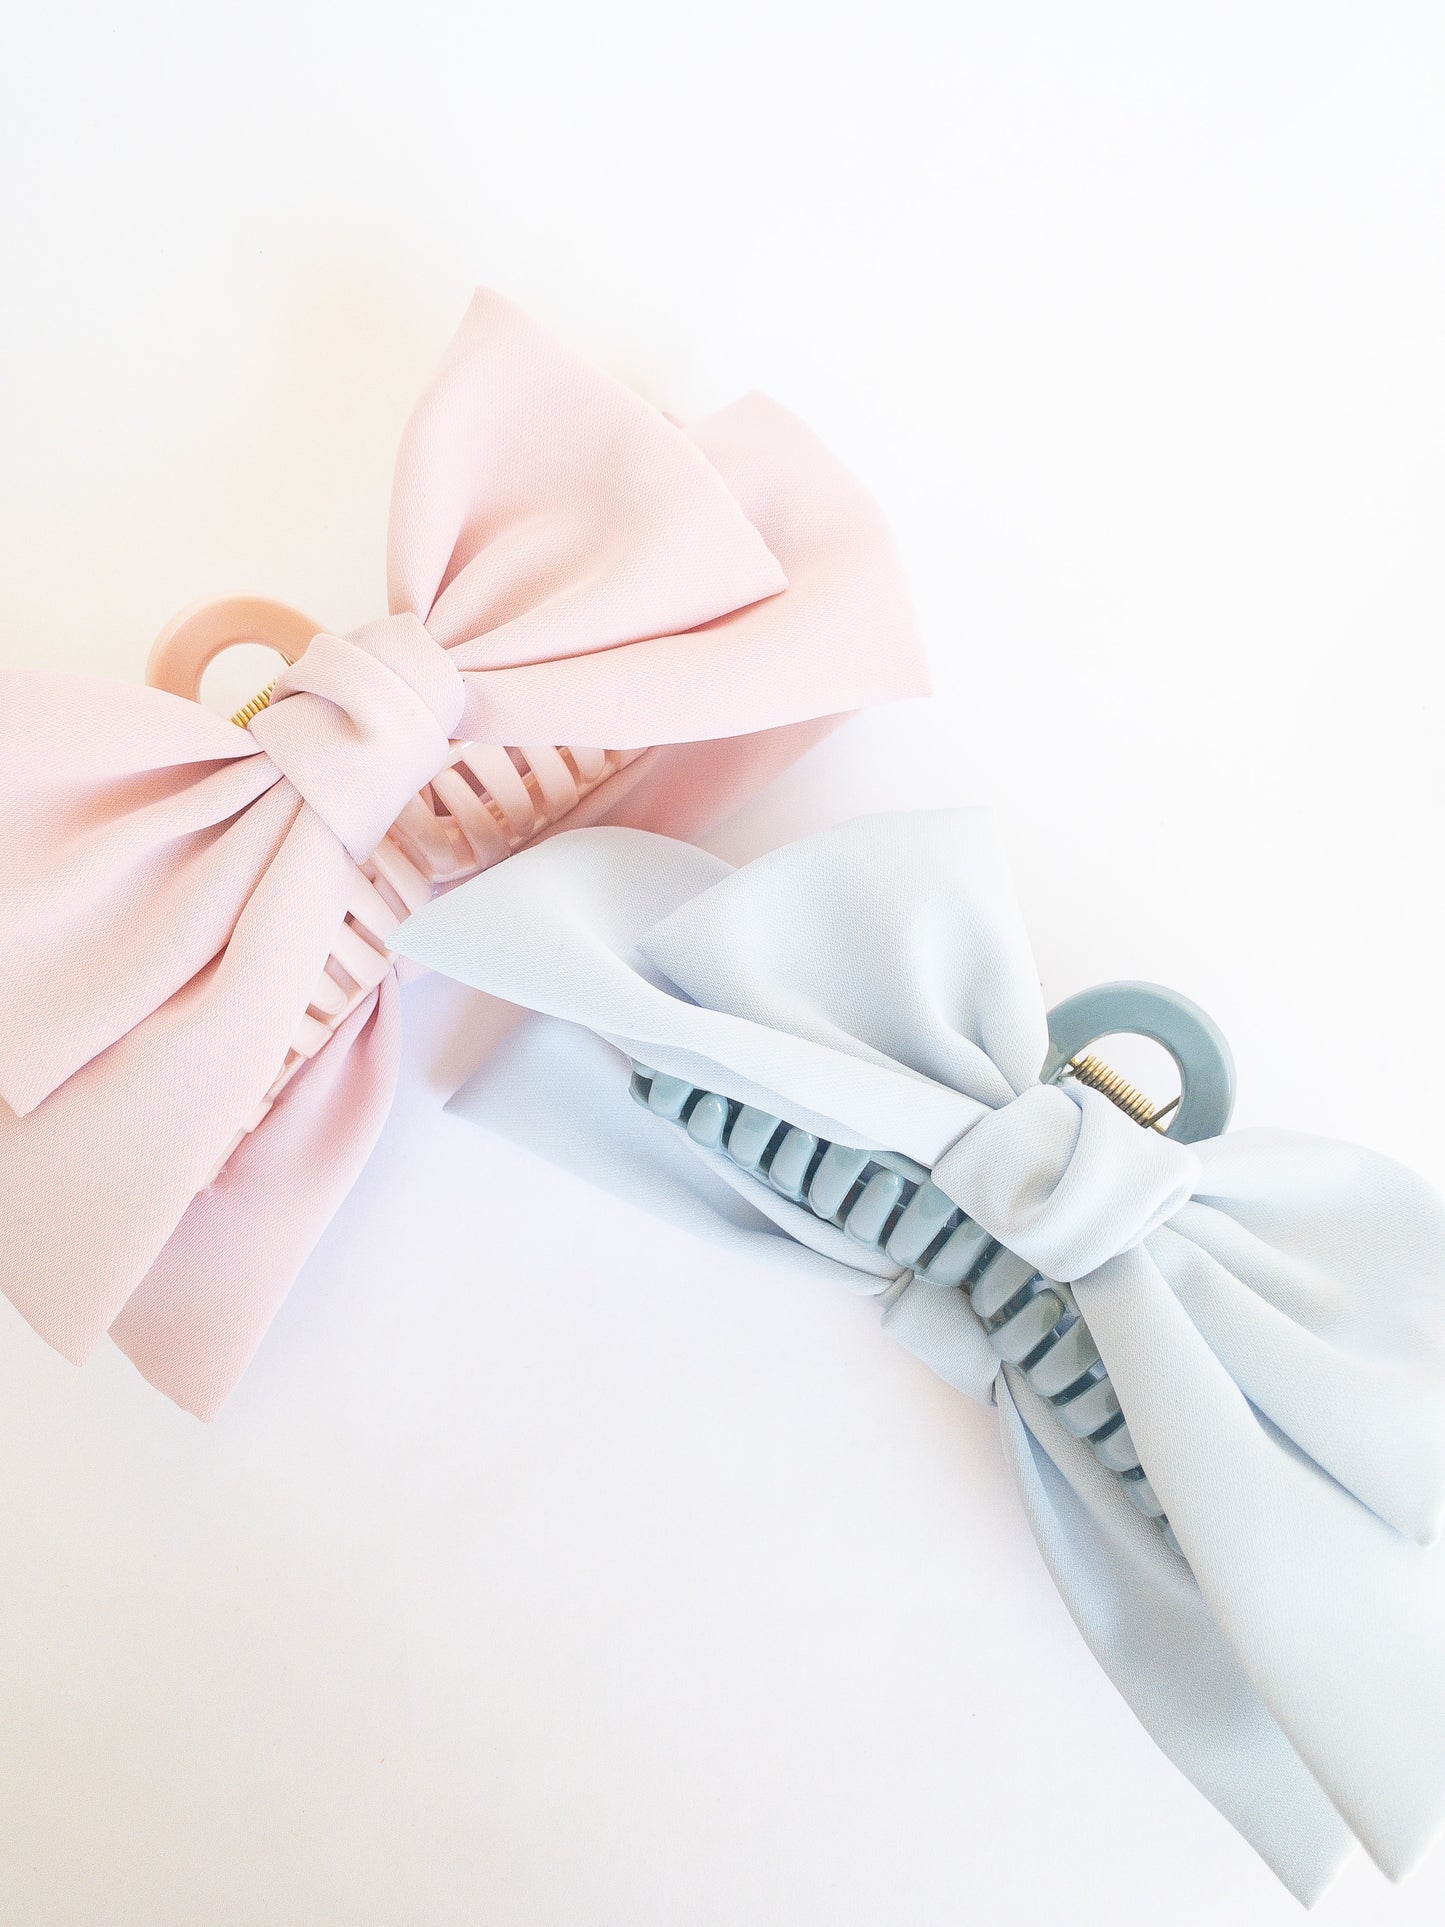 Put a bow on you, you're a gift!  This jumbo bow hair claw in a soft sky blue is for those girly days. When you want to frame your face with little wispy bangs and secure it with a pretty bow.